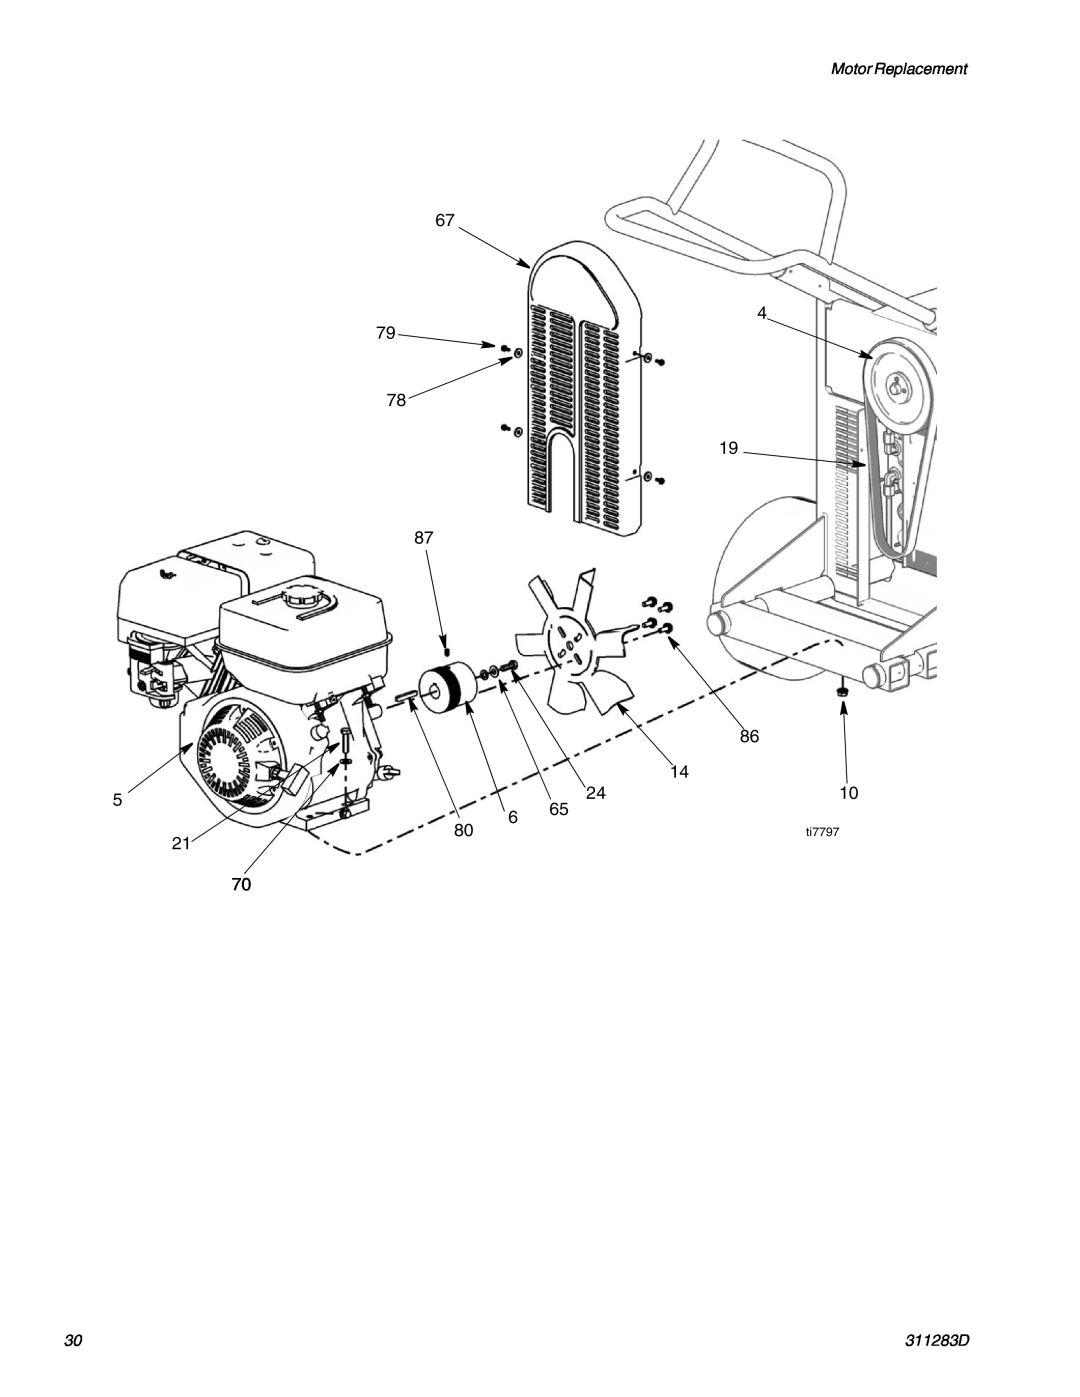 Graco Inc 249318, 253472, 253471, 249617 important safety instructions Motor Replacement, 311283D, ti7797 